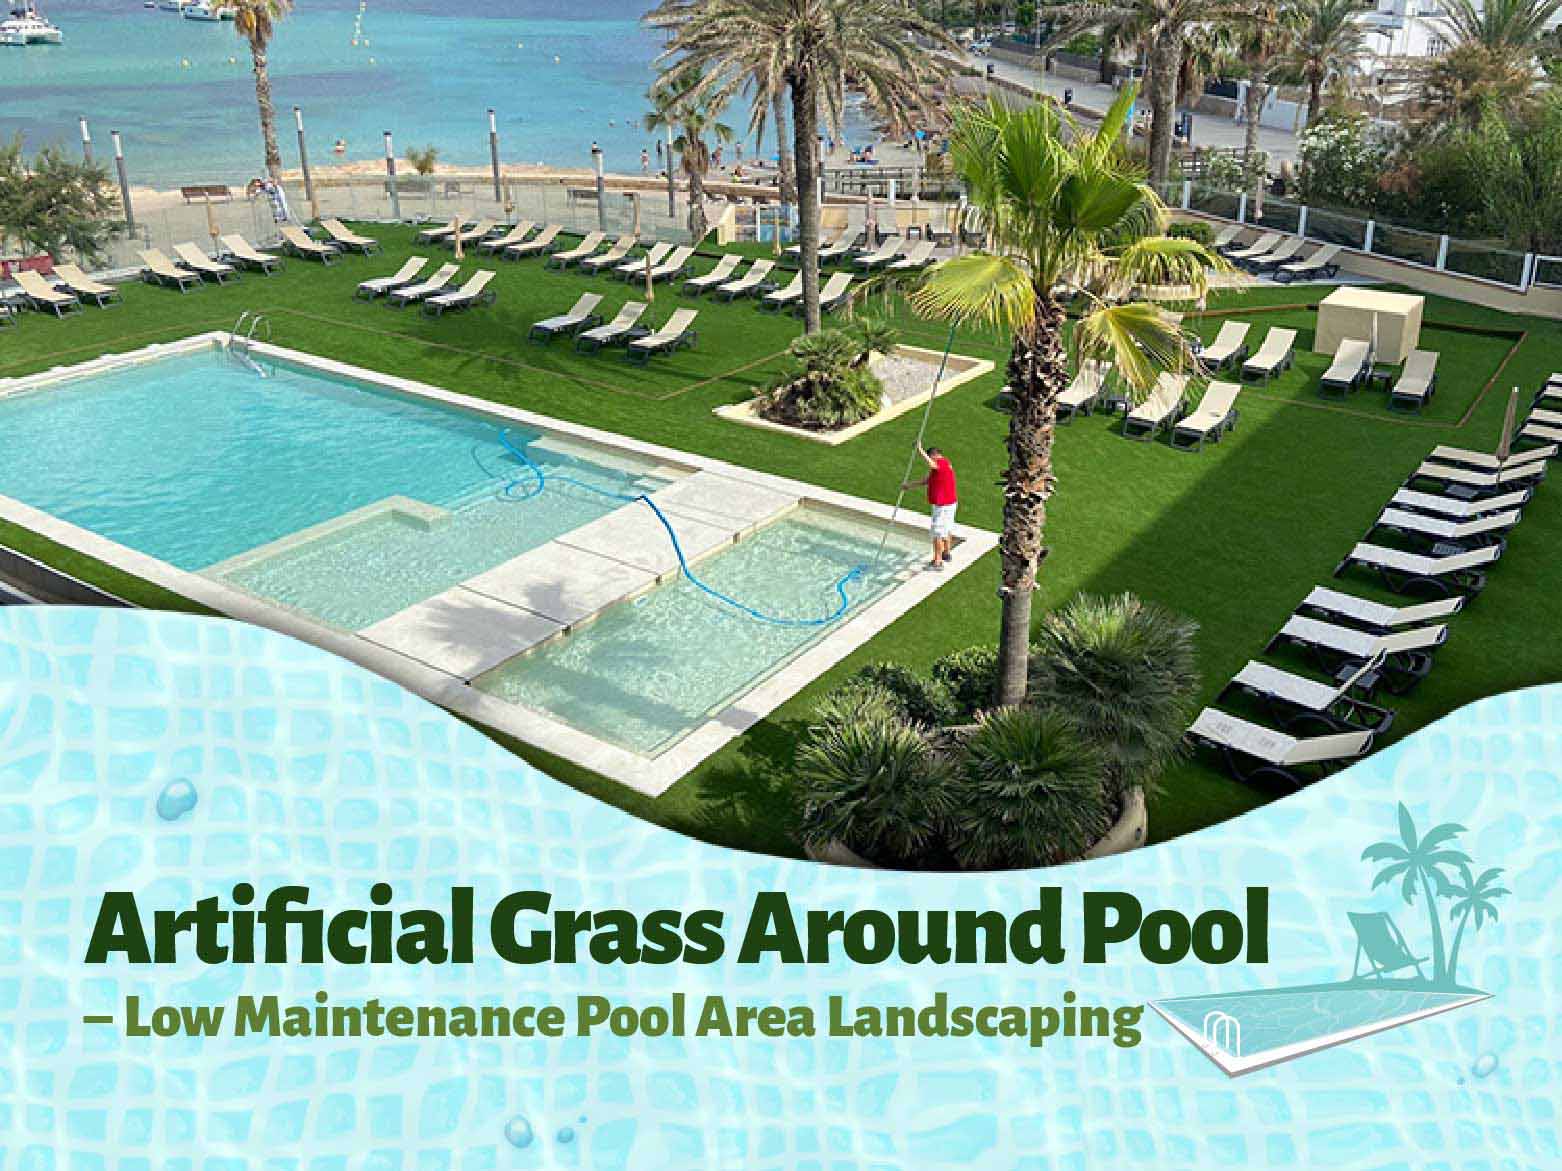 Artificial Grass Around Pools - Low Maintenance Pool Area Landscaping